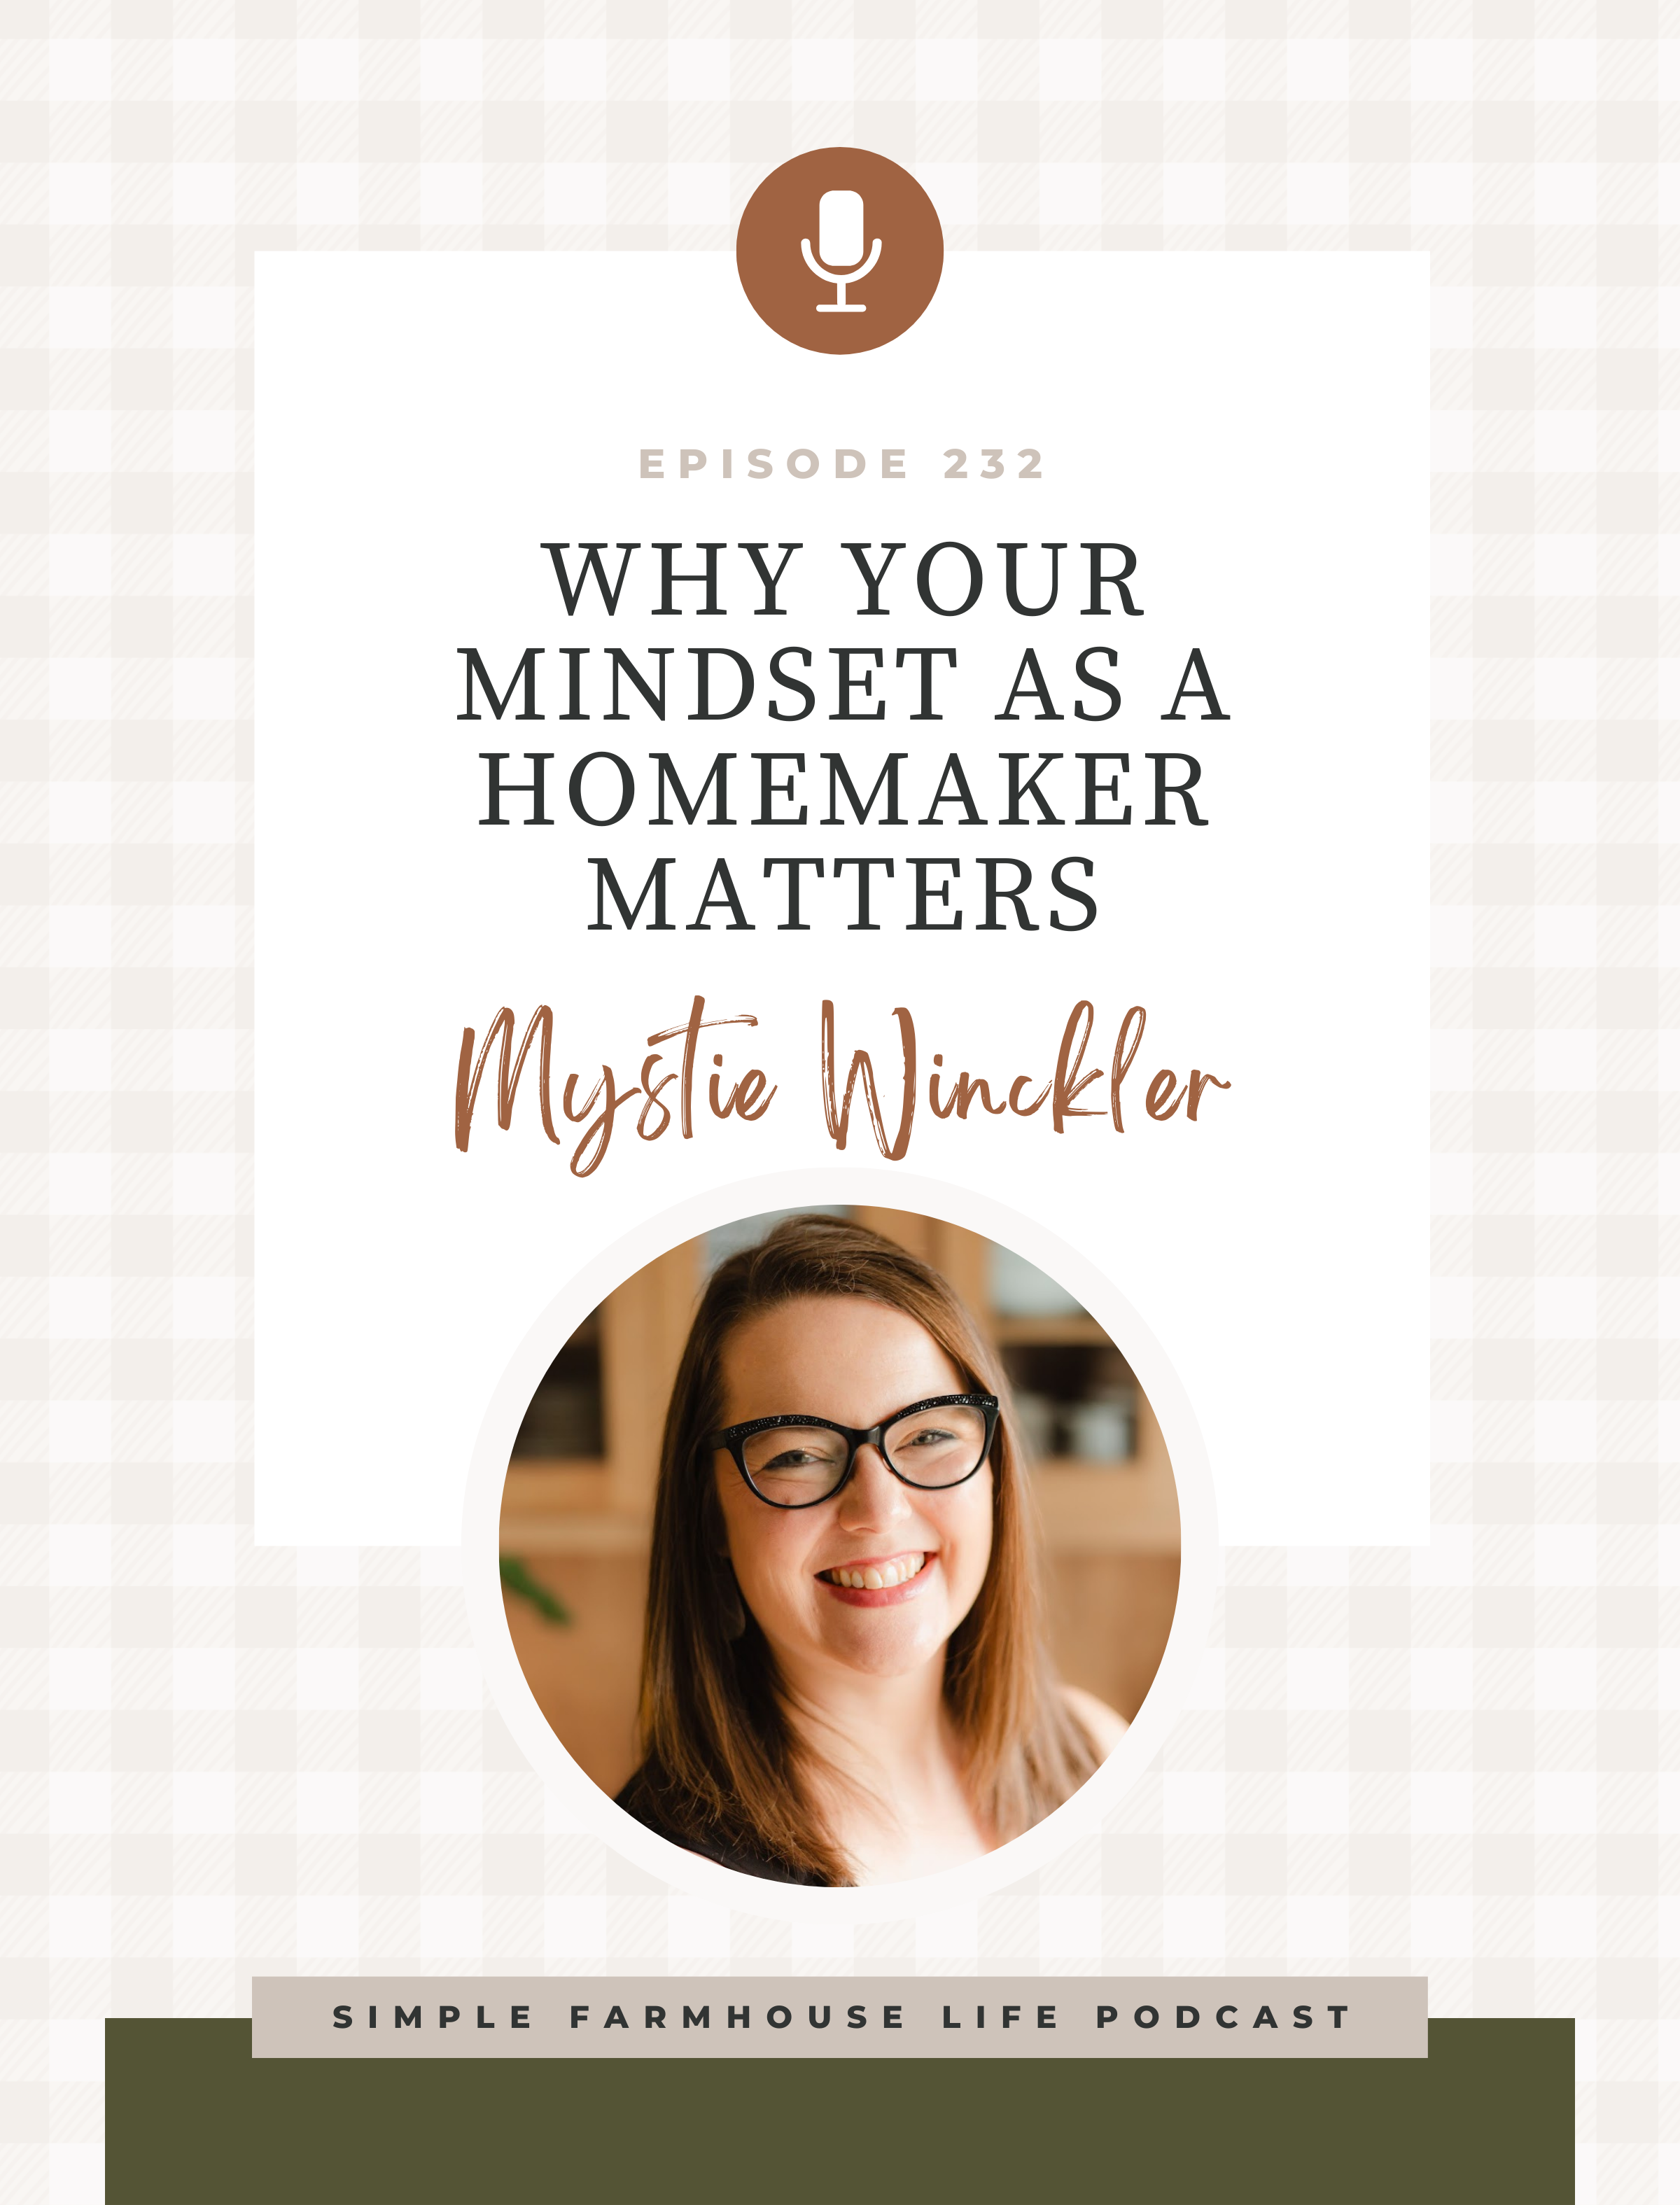 Why Your Mindset as a Homemaker Matters | Mystie Winckler of Simply Convivial (Episode 232)